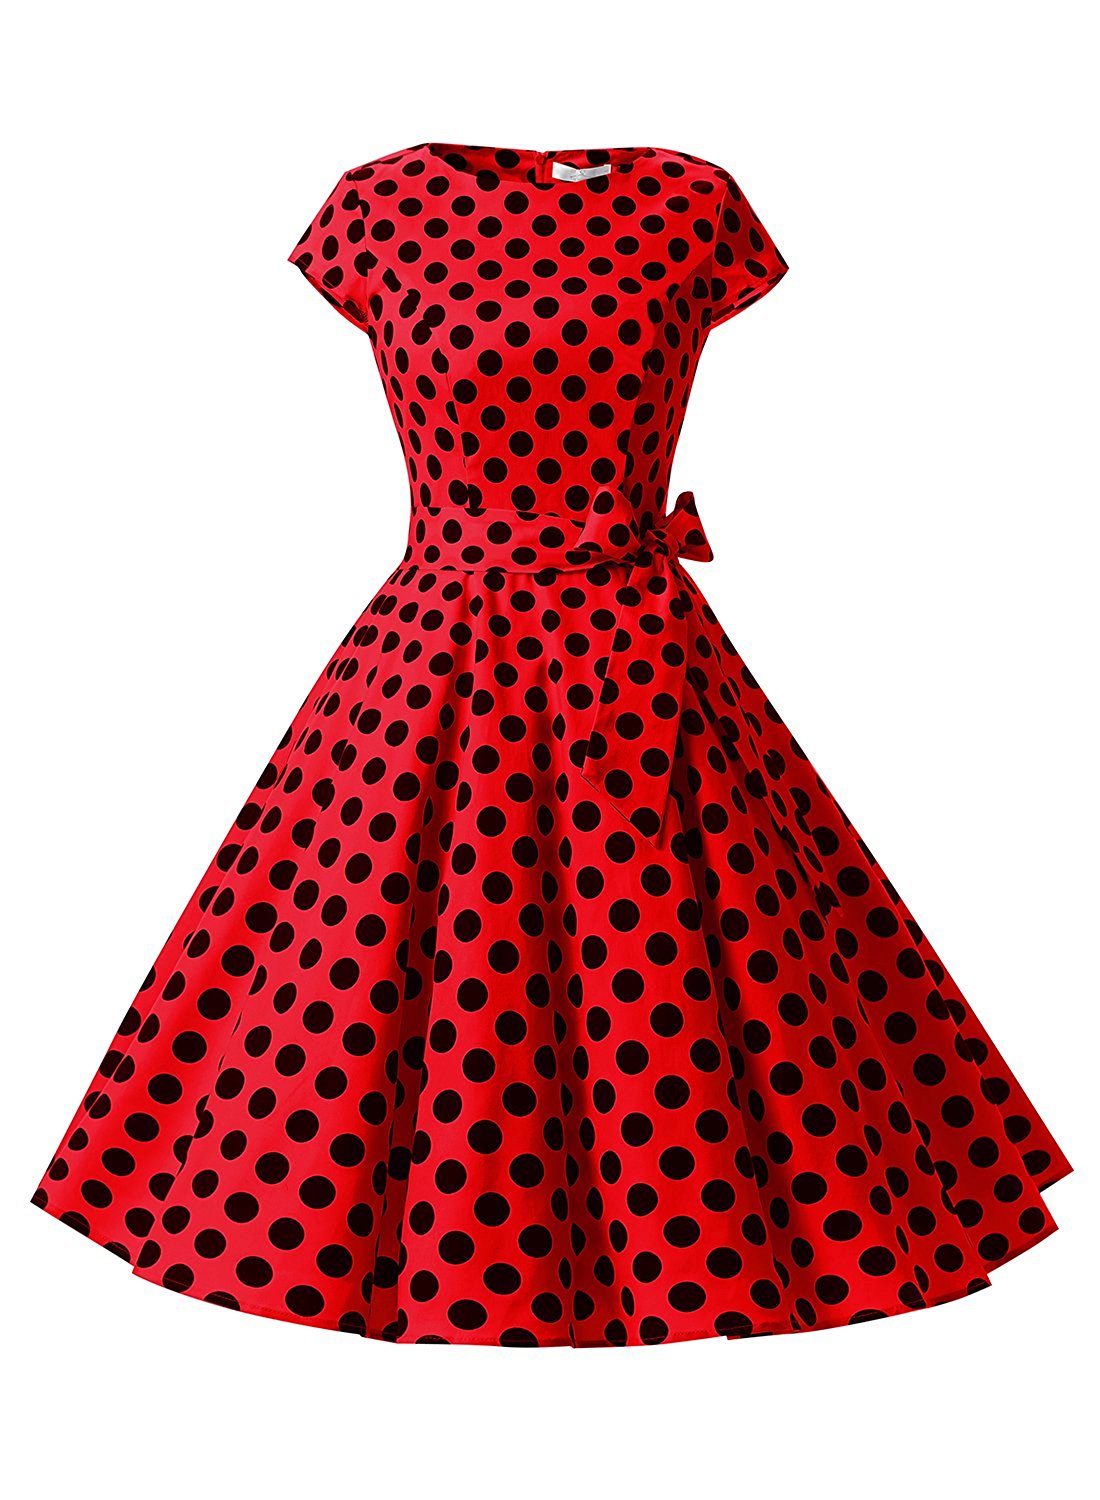 50s Fashion Rockabilly Style Red Polka Dots Vintage Dress With Bowknot ...